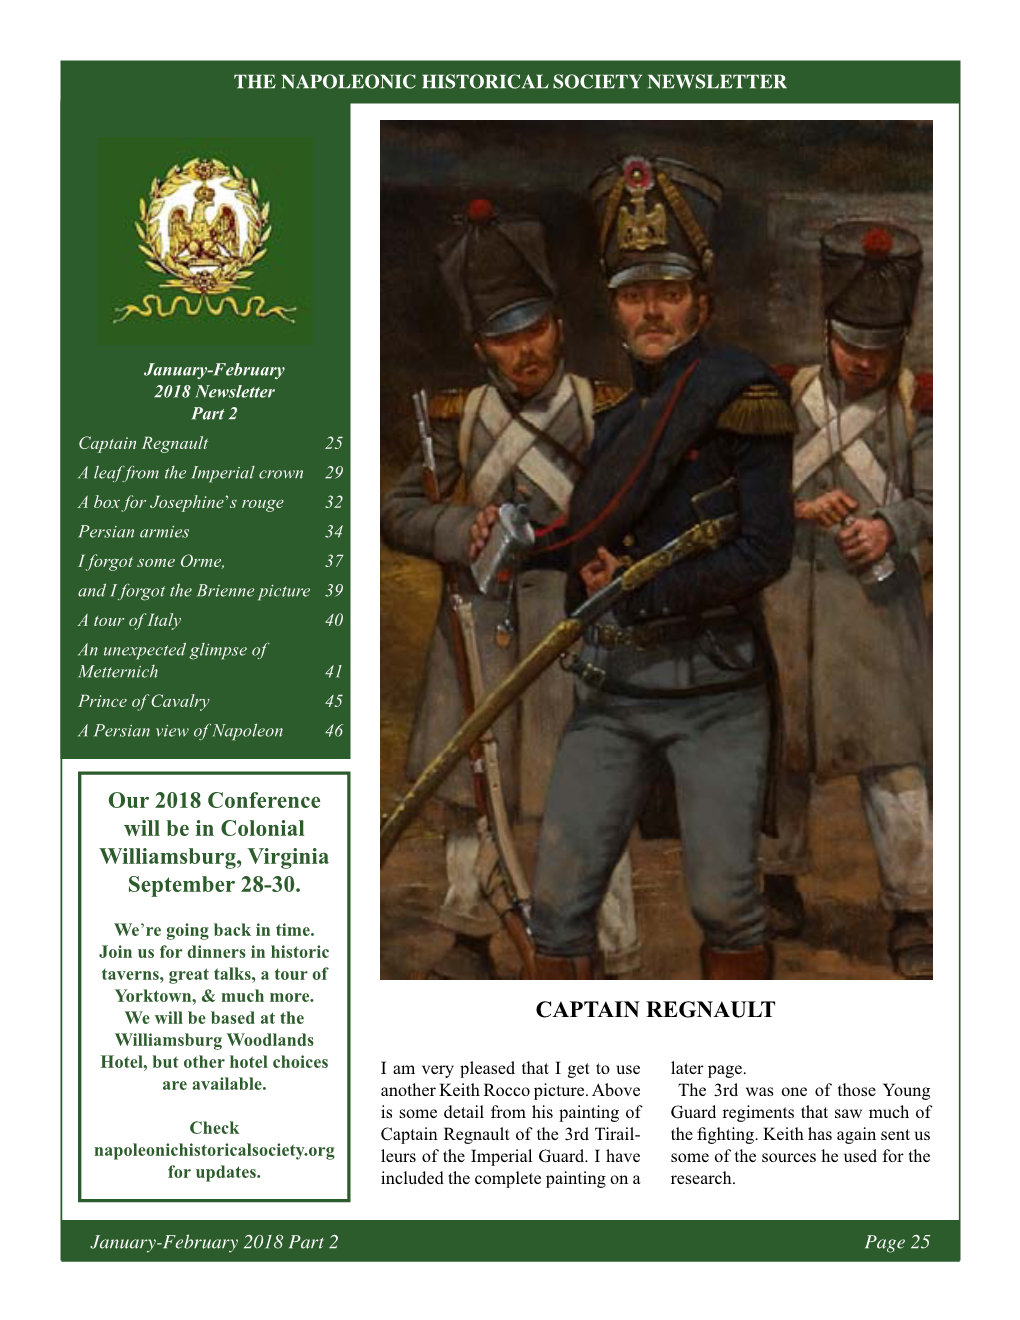 January-February 2018 Part 2 Page 25 the NAPOLEONIC HISTORICAL SOCIETY NEWSLETTER